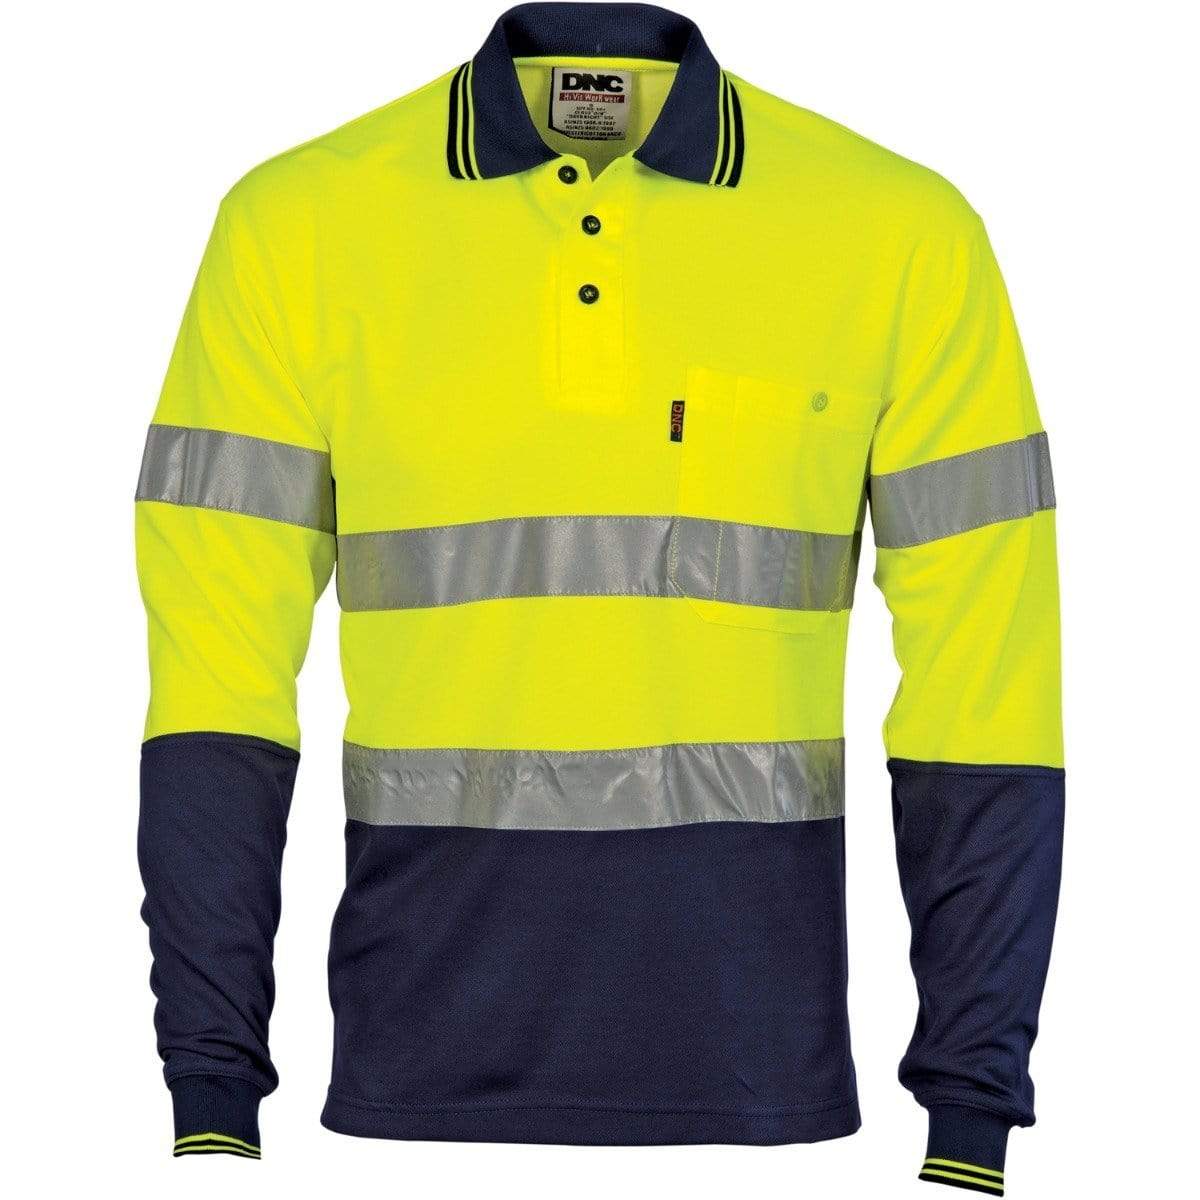 Dnc Workwear Hi-vis Two Tone Cotton Back Long Sleeve Polo With Generic Reflective Tape - 3718 Work Wear DNC Workwear Yellow/Navy 2XL 